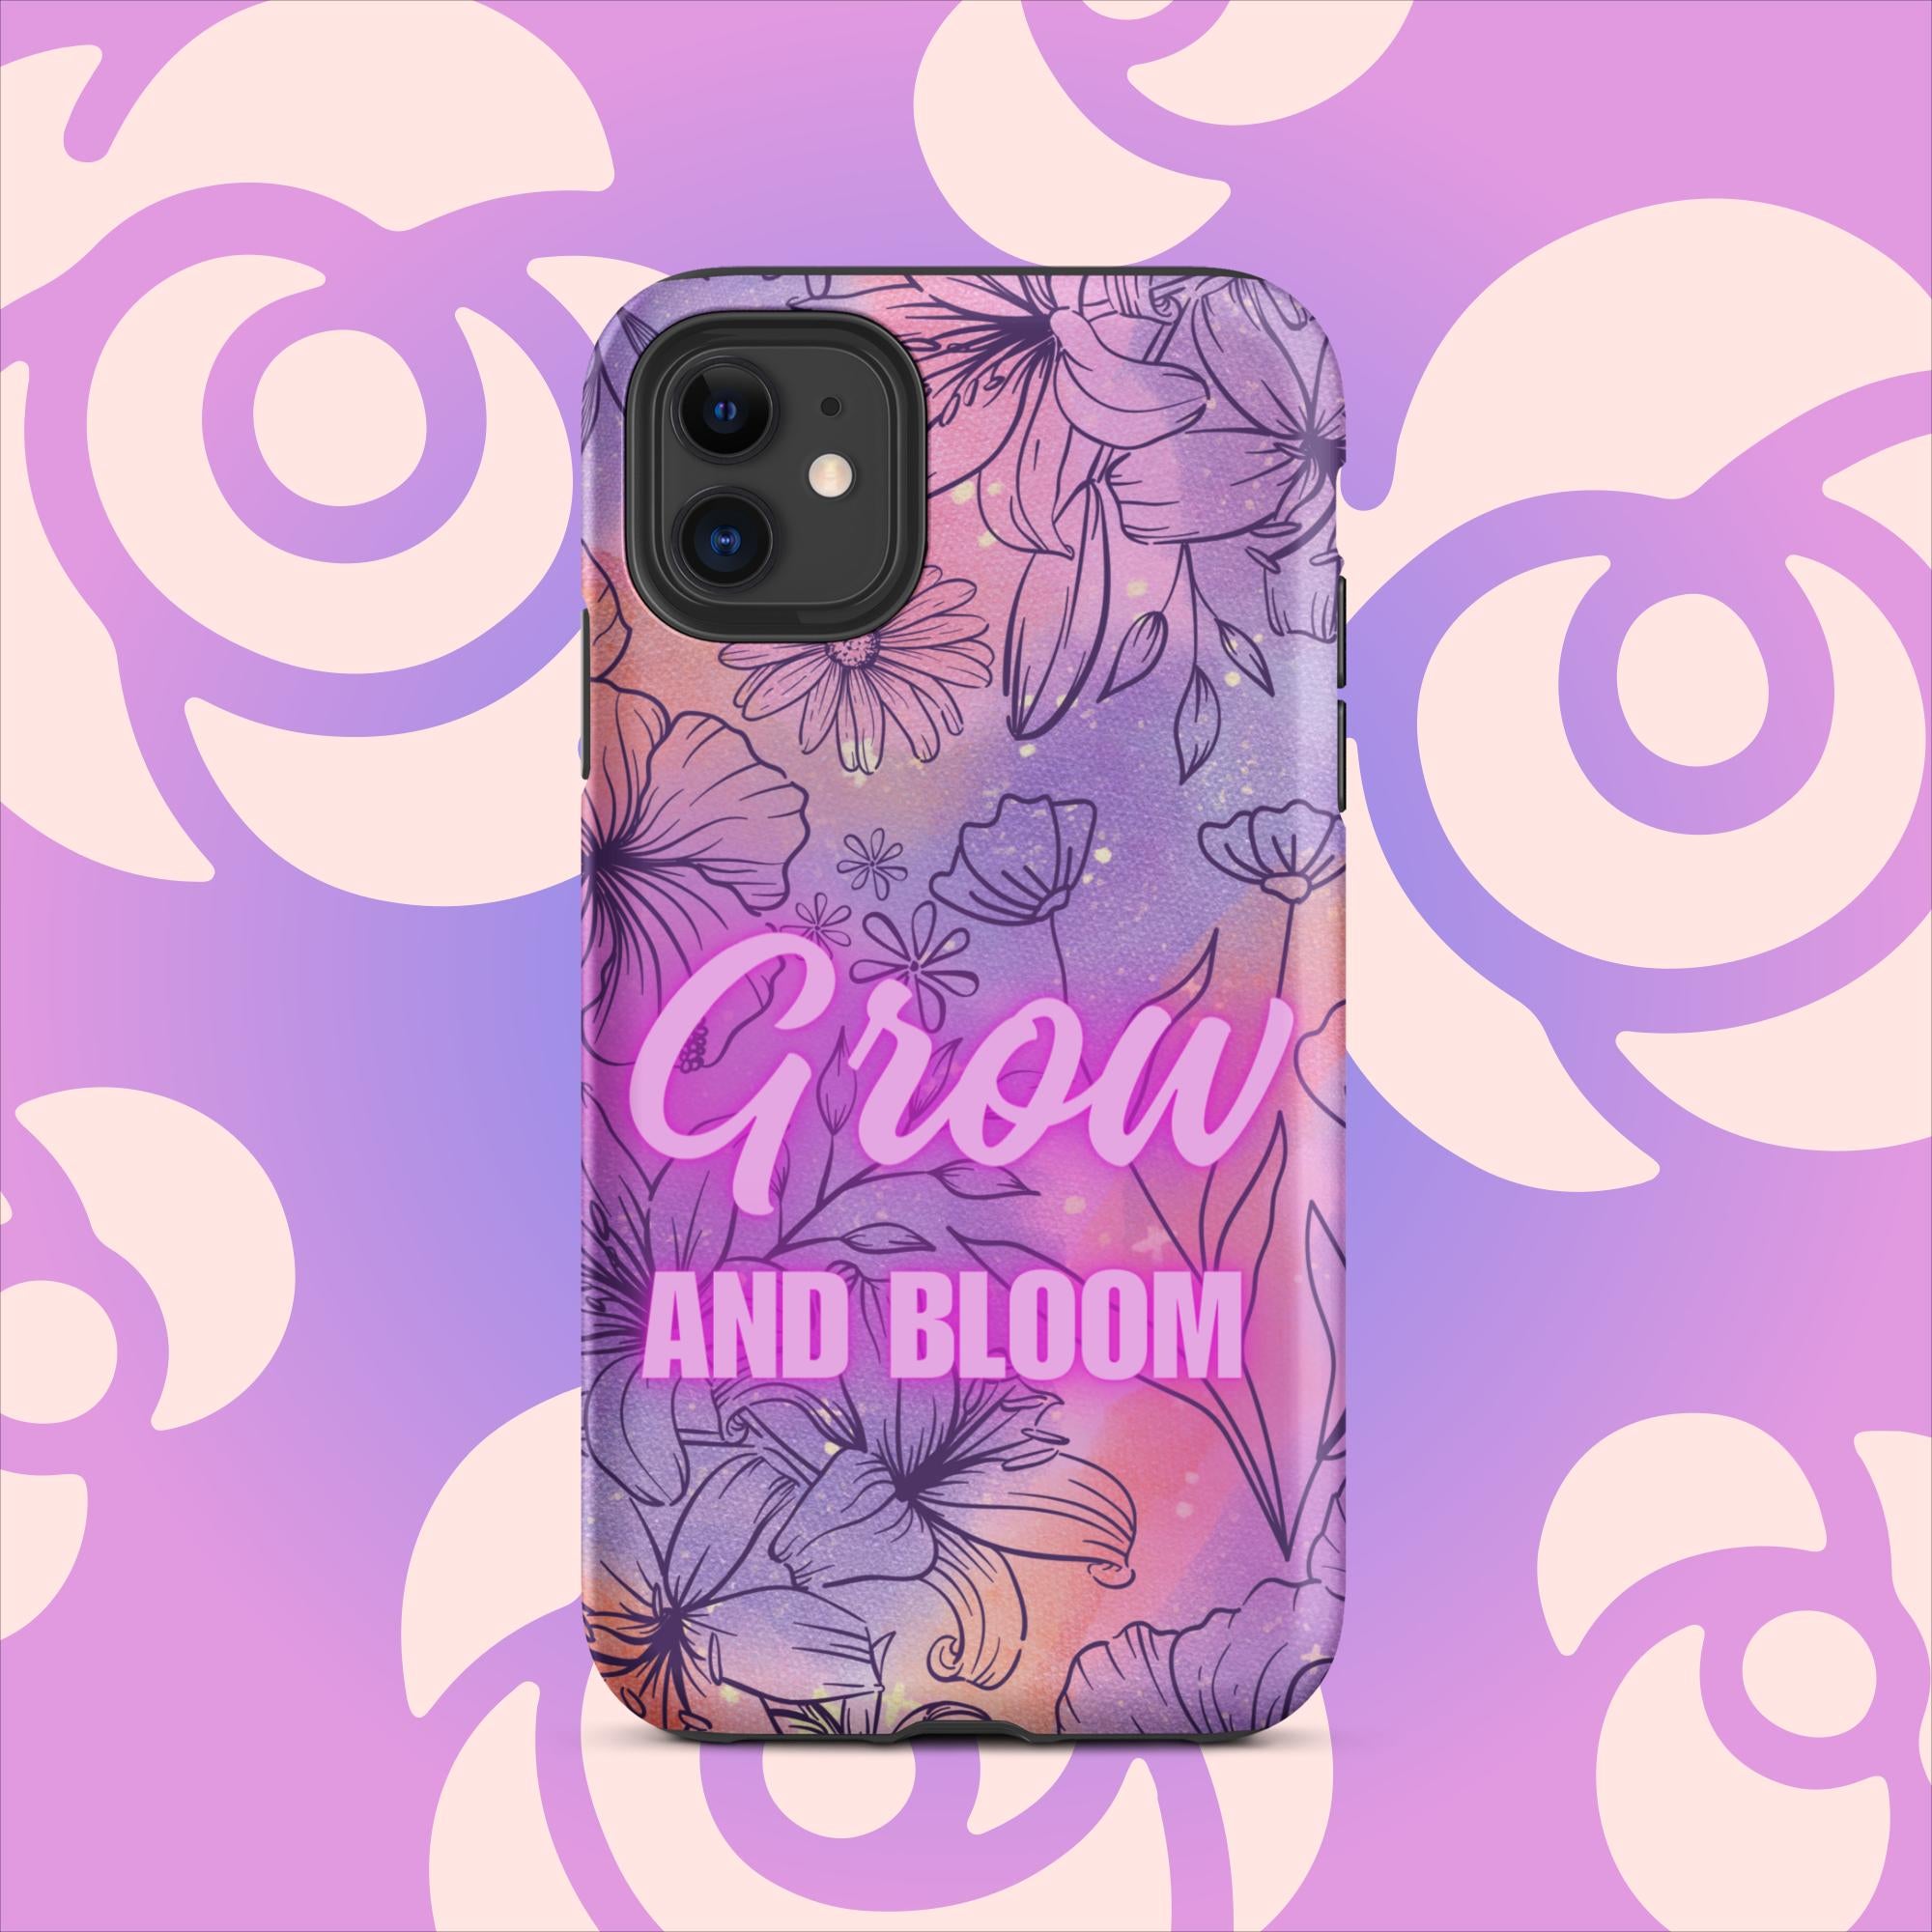 Grow and Bloom - Iphone Case